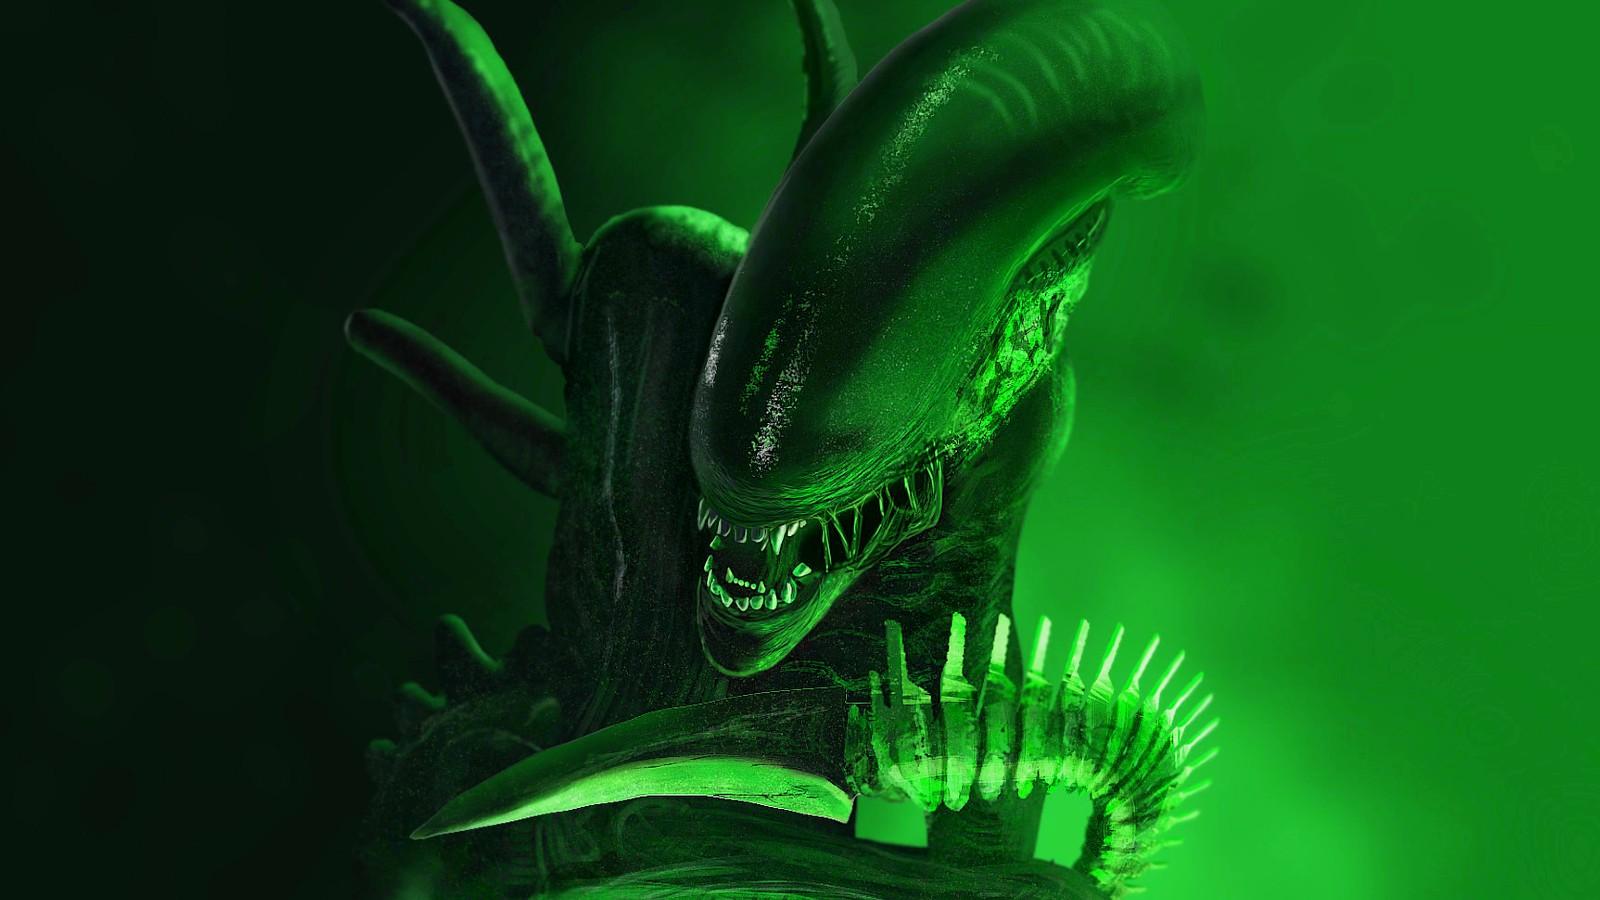 A xenomorph from the Alien franchise